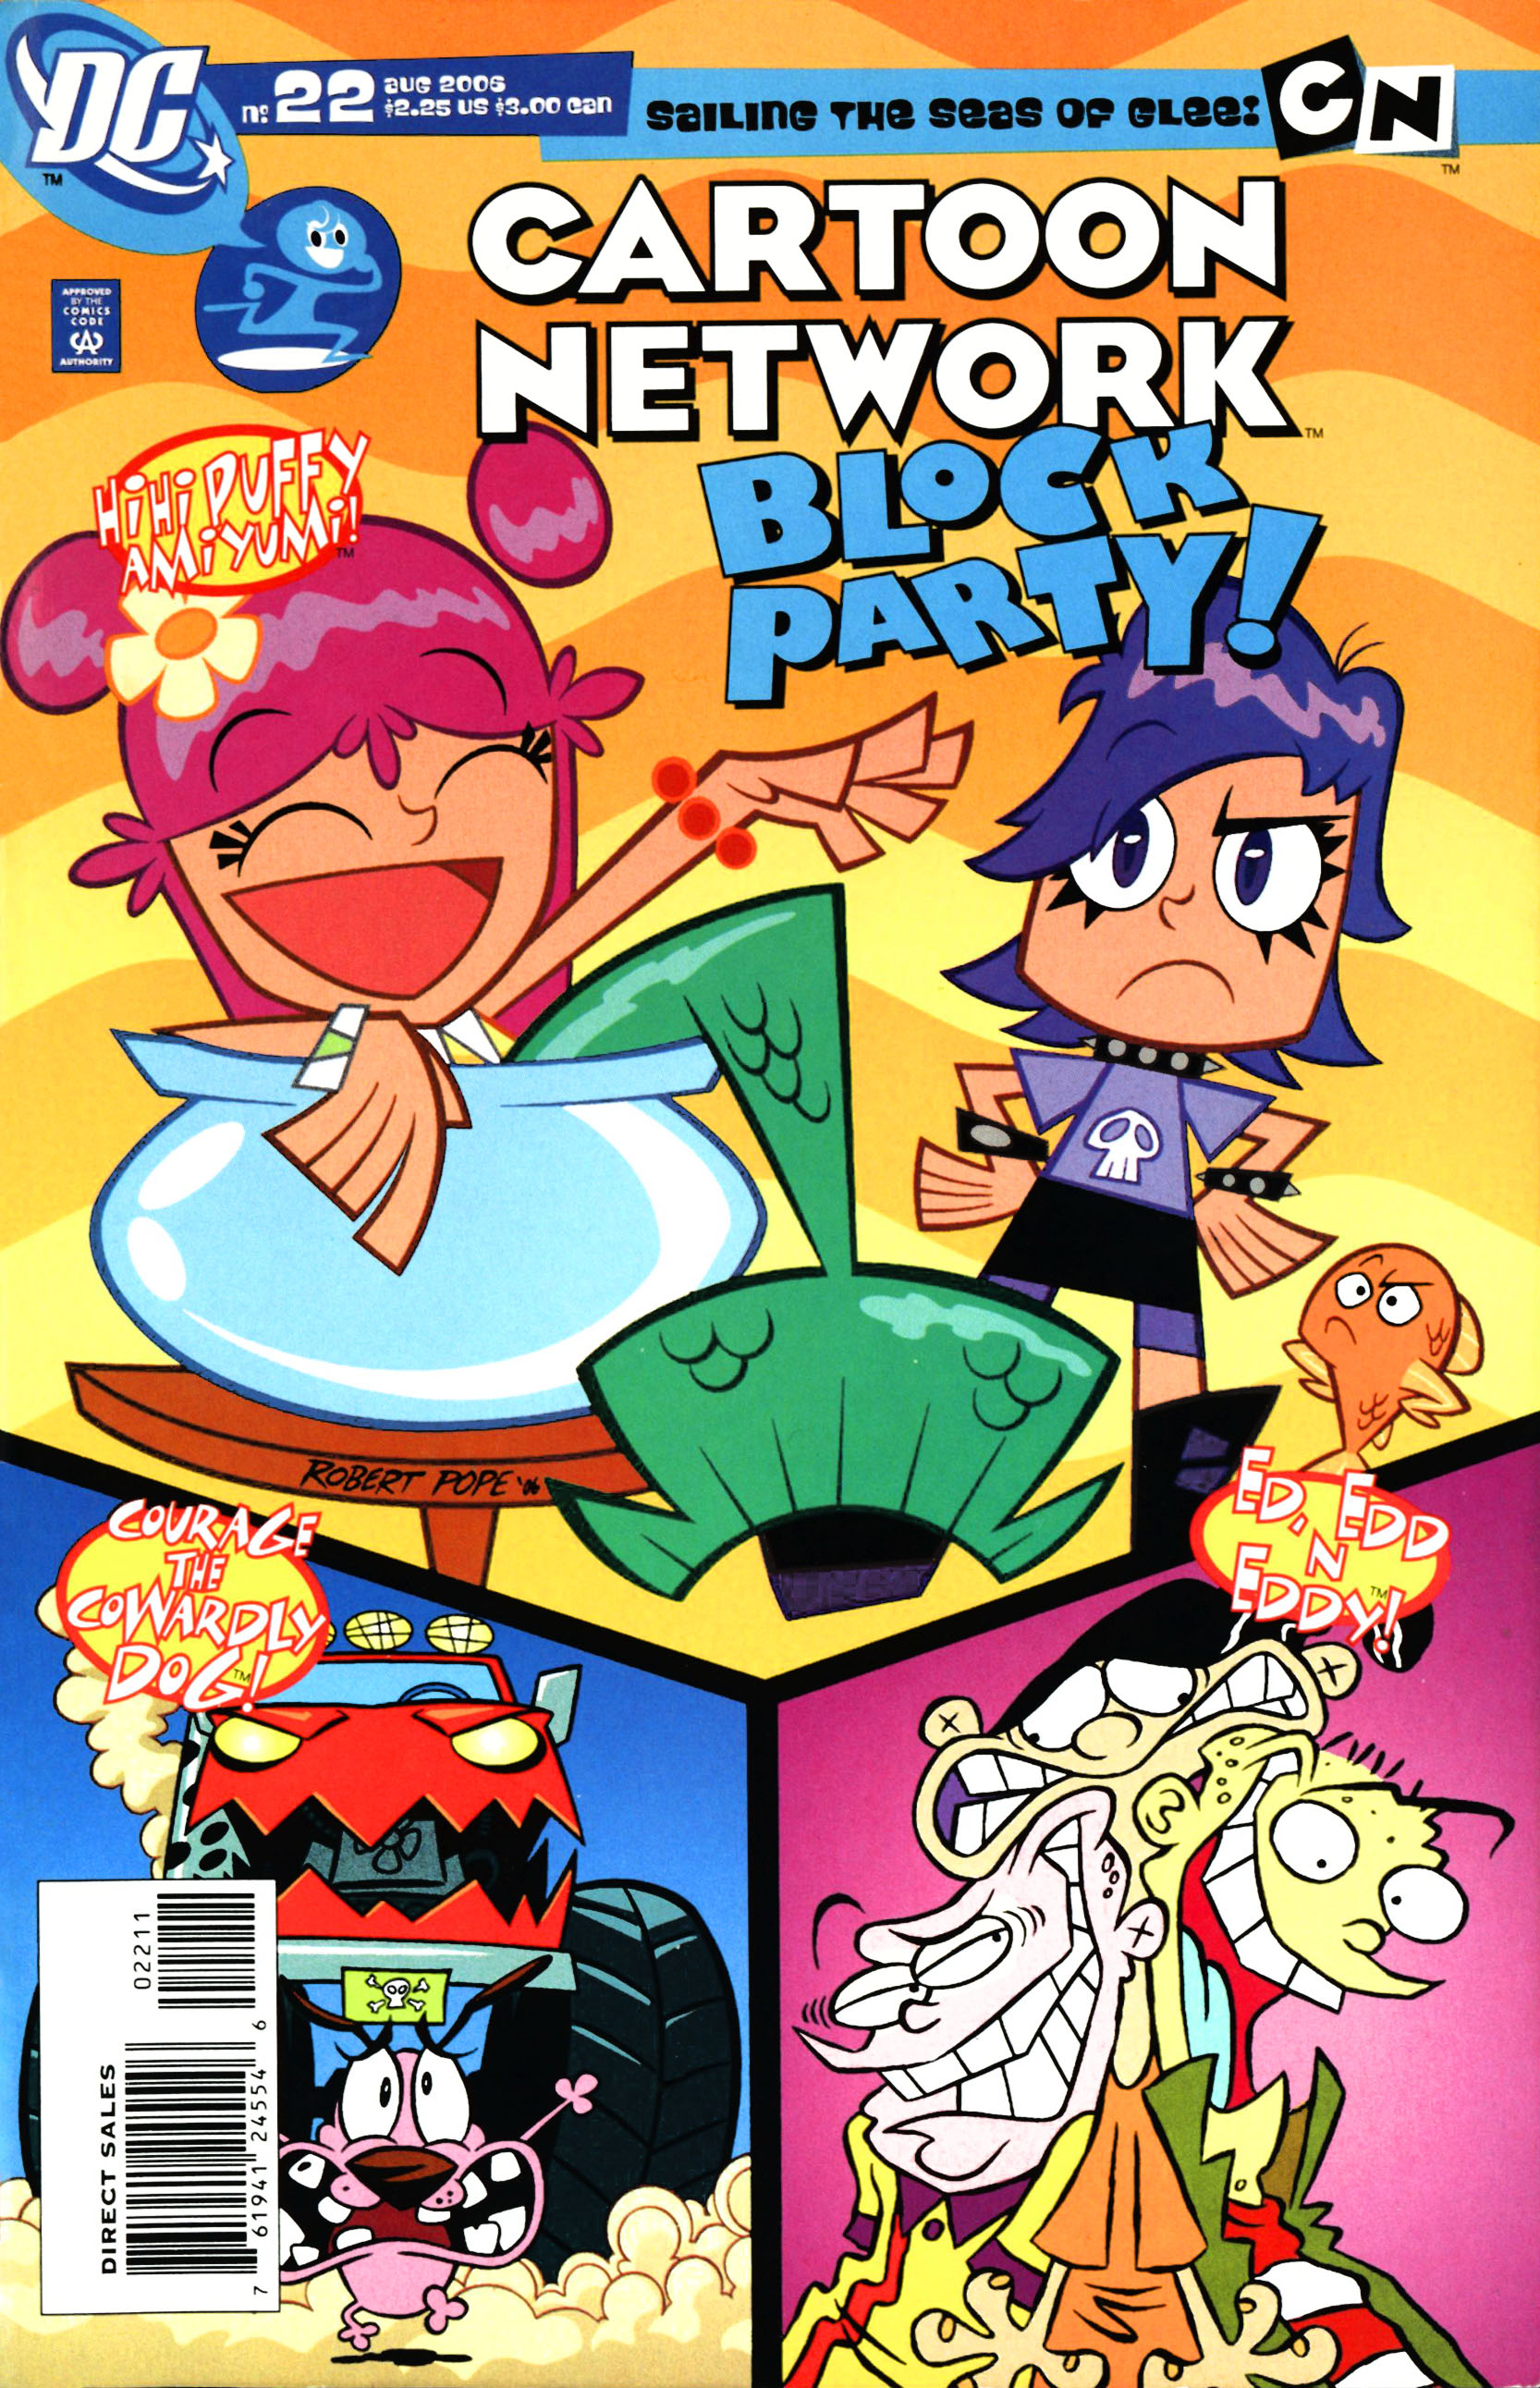 Read Cartoon Network Block Party Issue #22 Online